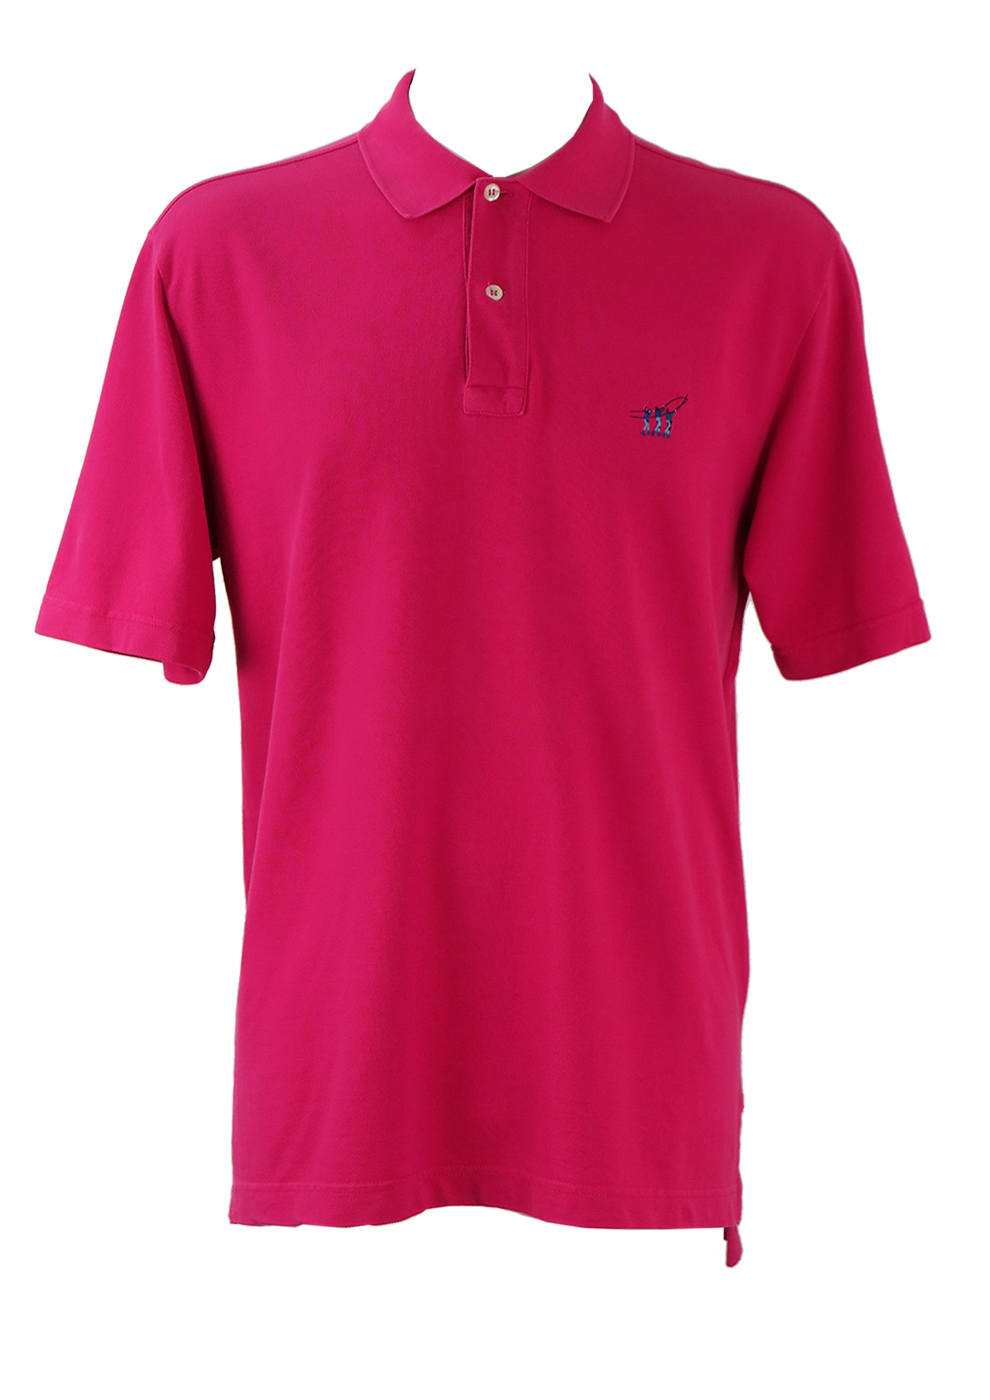 Henry Cotton\u2019s Polo shirt wit casual uitstraling Mode Shirts Polo shirts Henry Cotton’s 